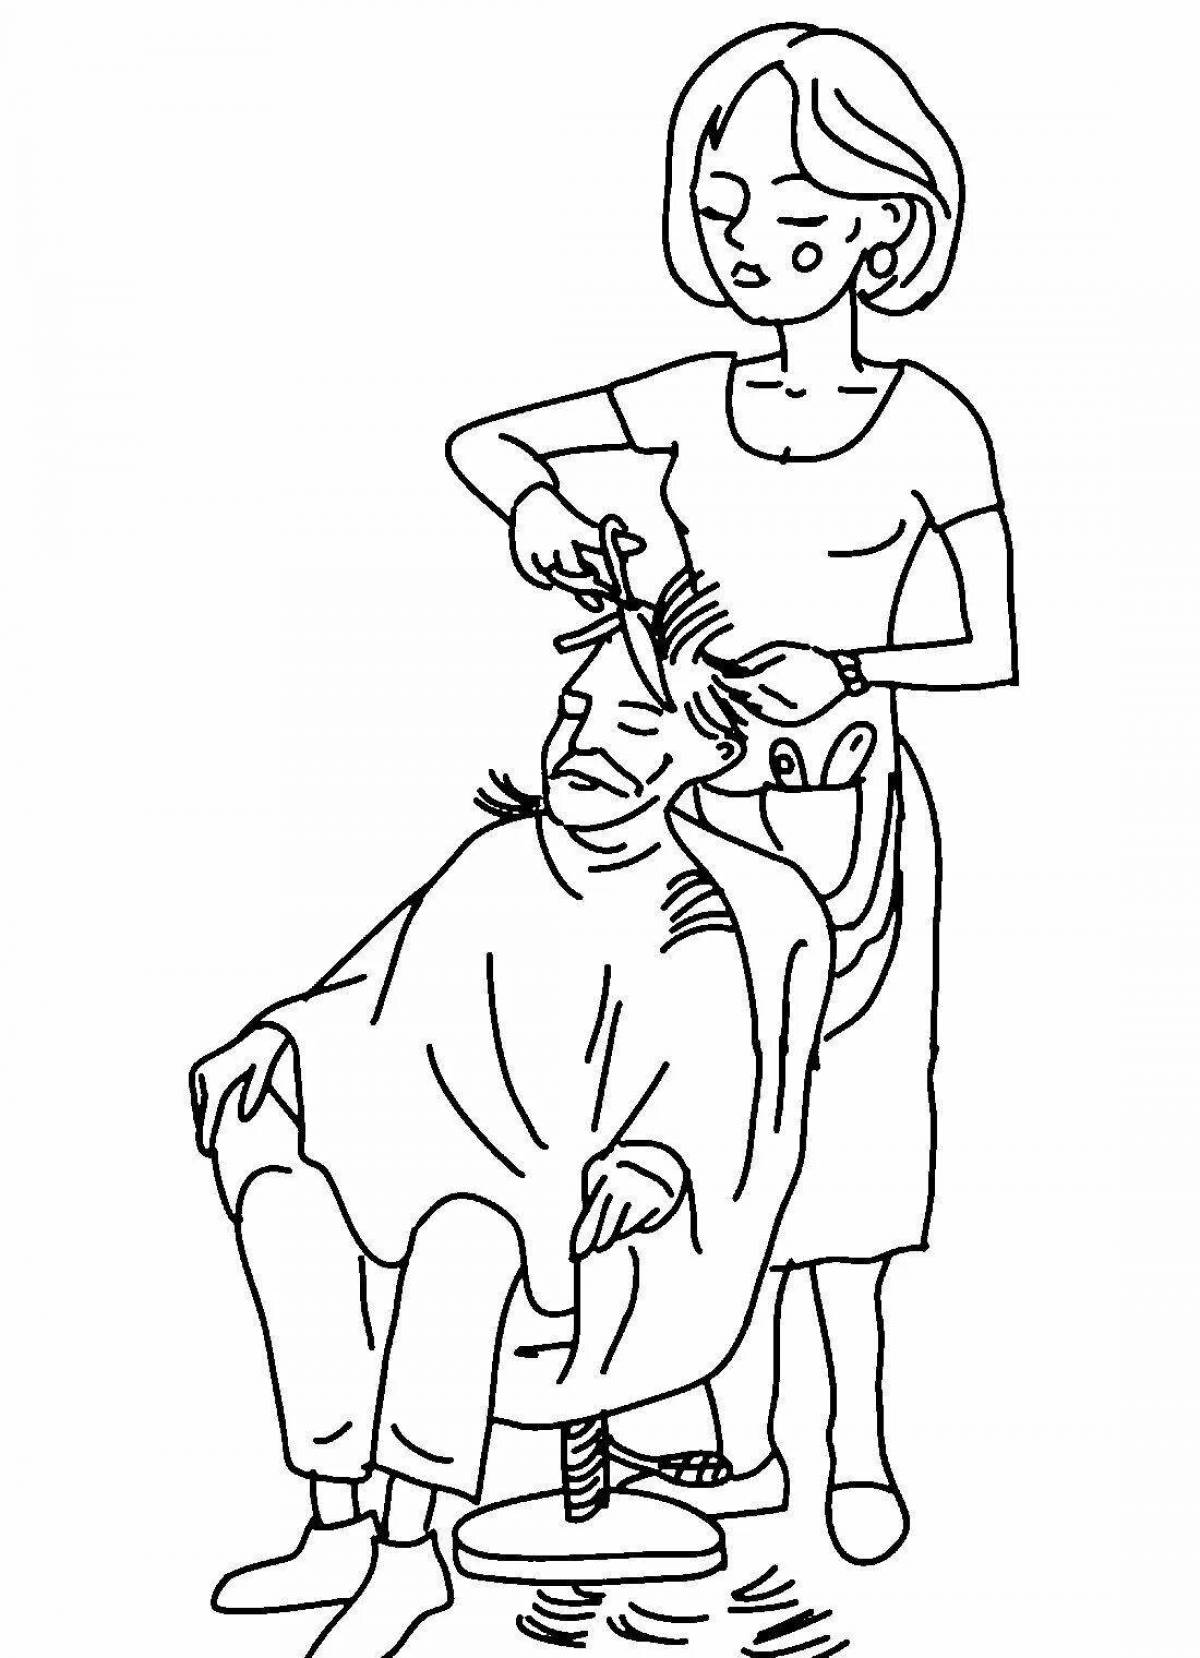 Playful hairdresser coloring page